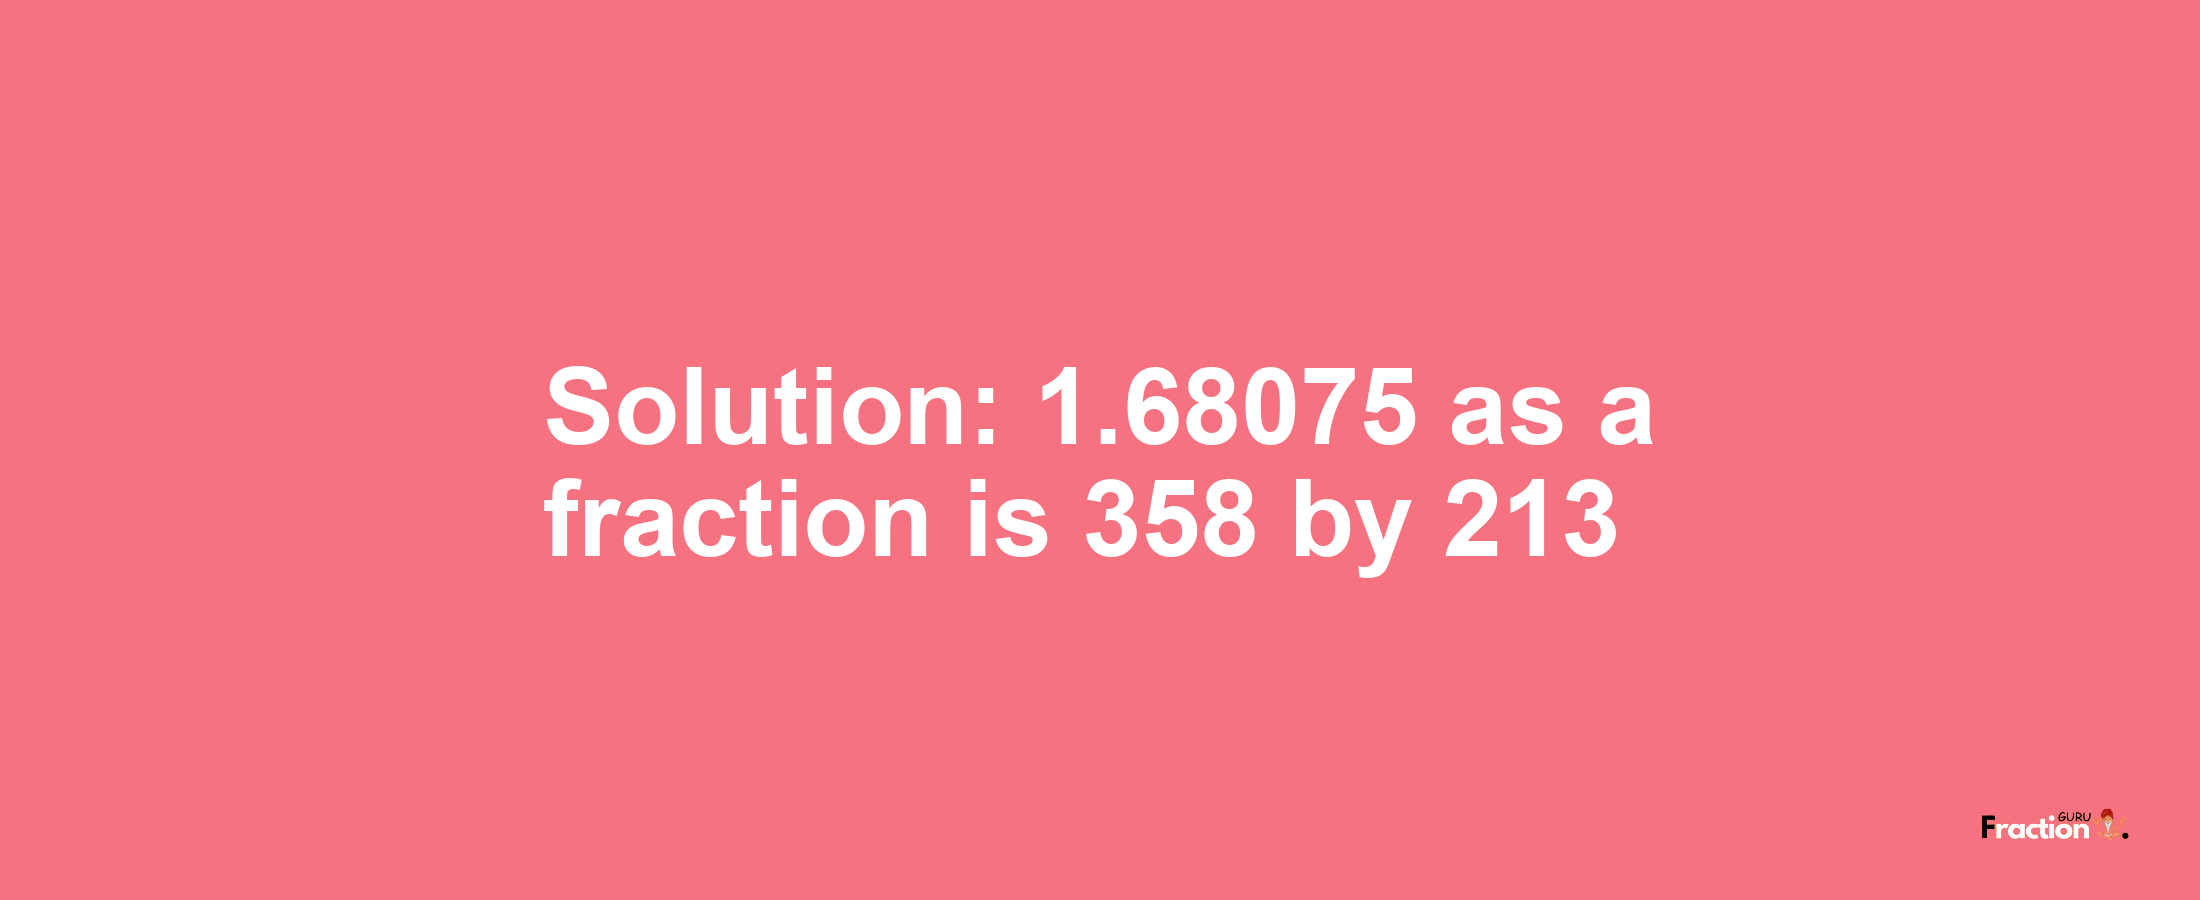 Solution:1.68075 as a fraction is 358/213